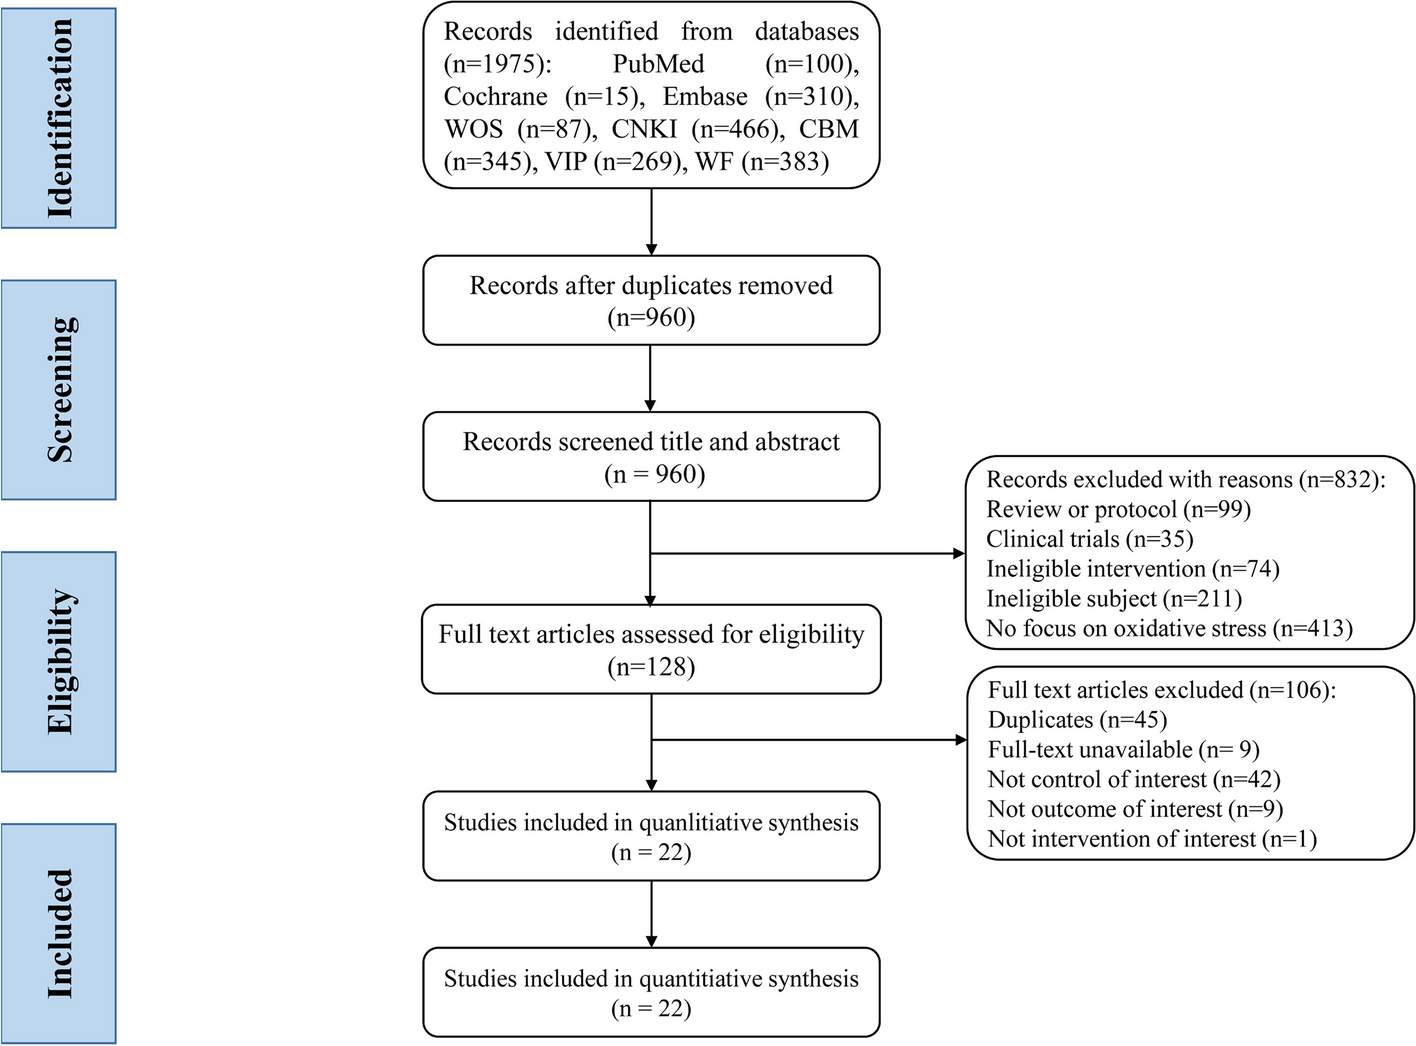 The effect of acupuncture on oxidative stress in animal models of vascular dementia: a systematic review and meta-analysis